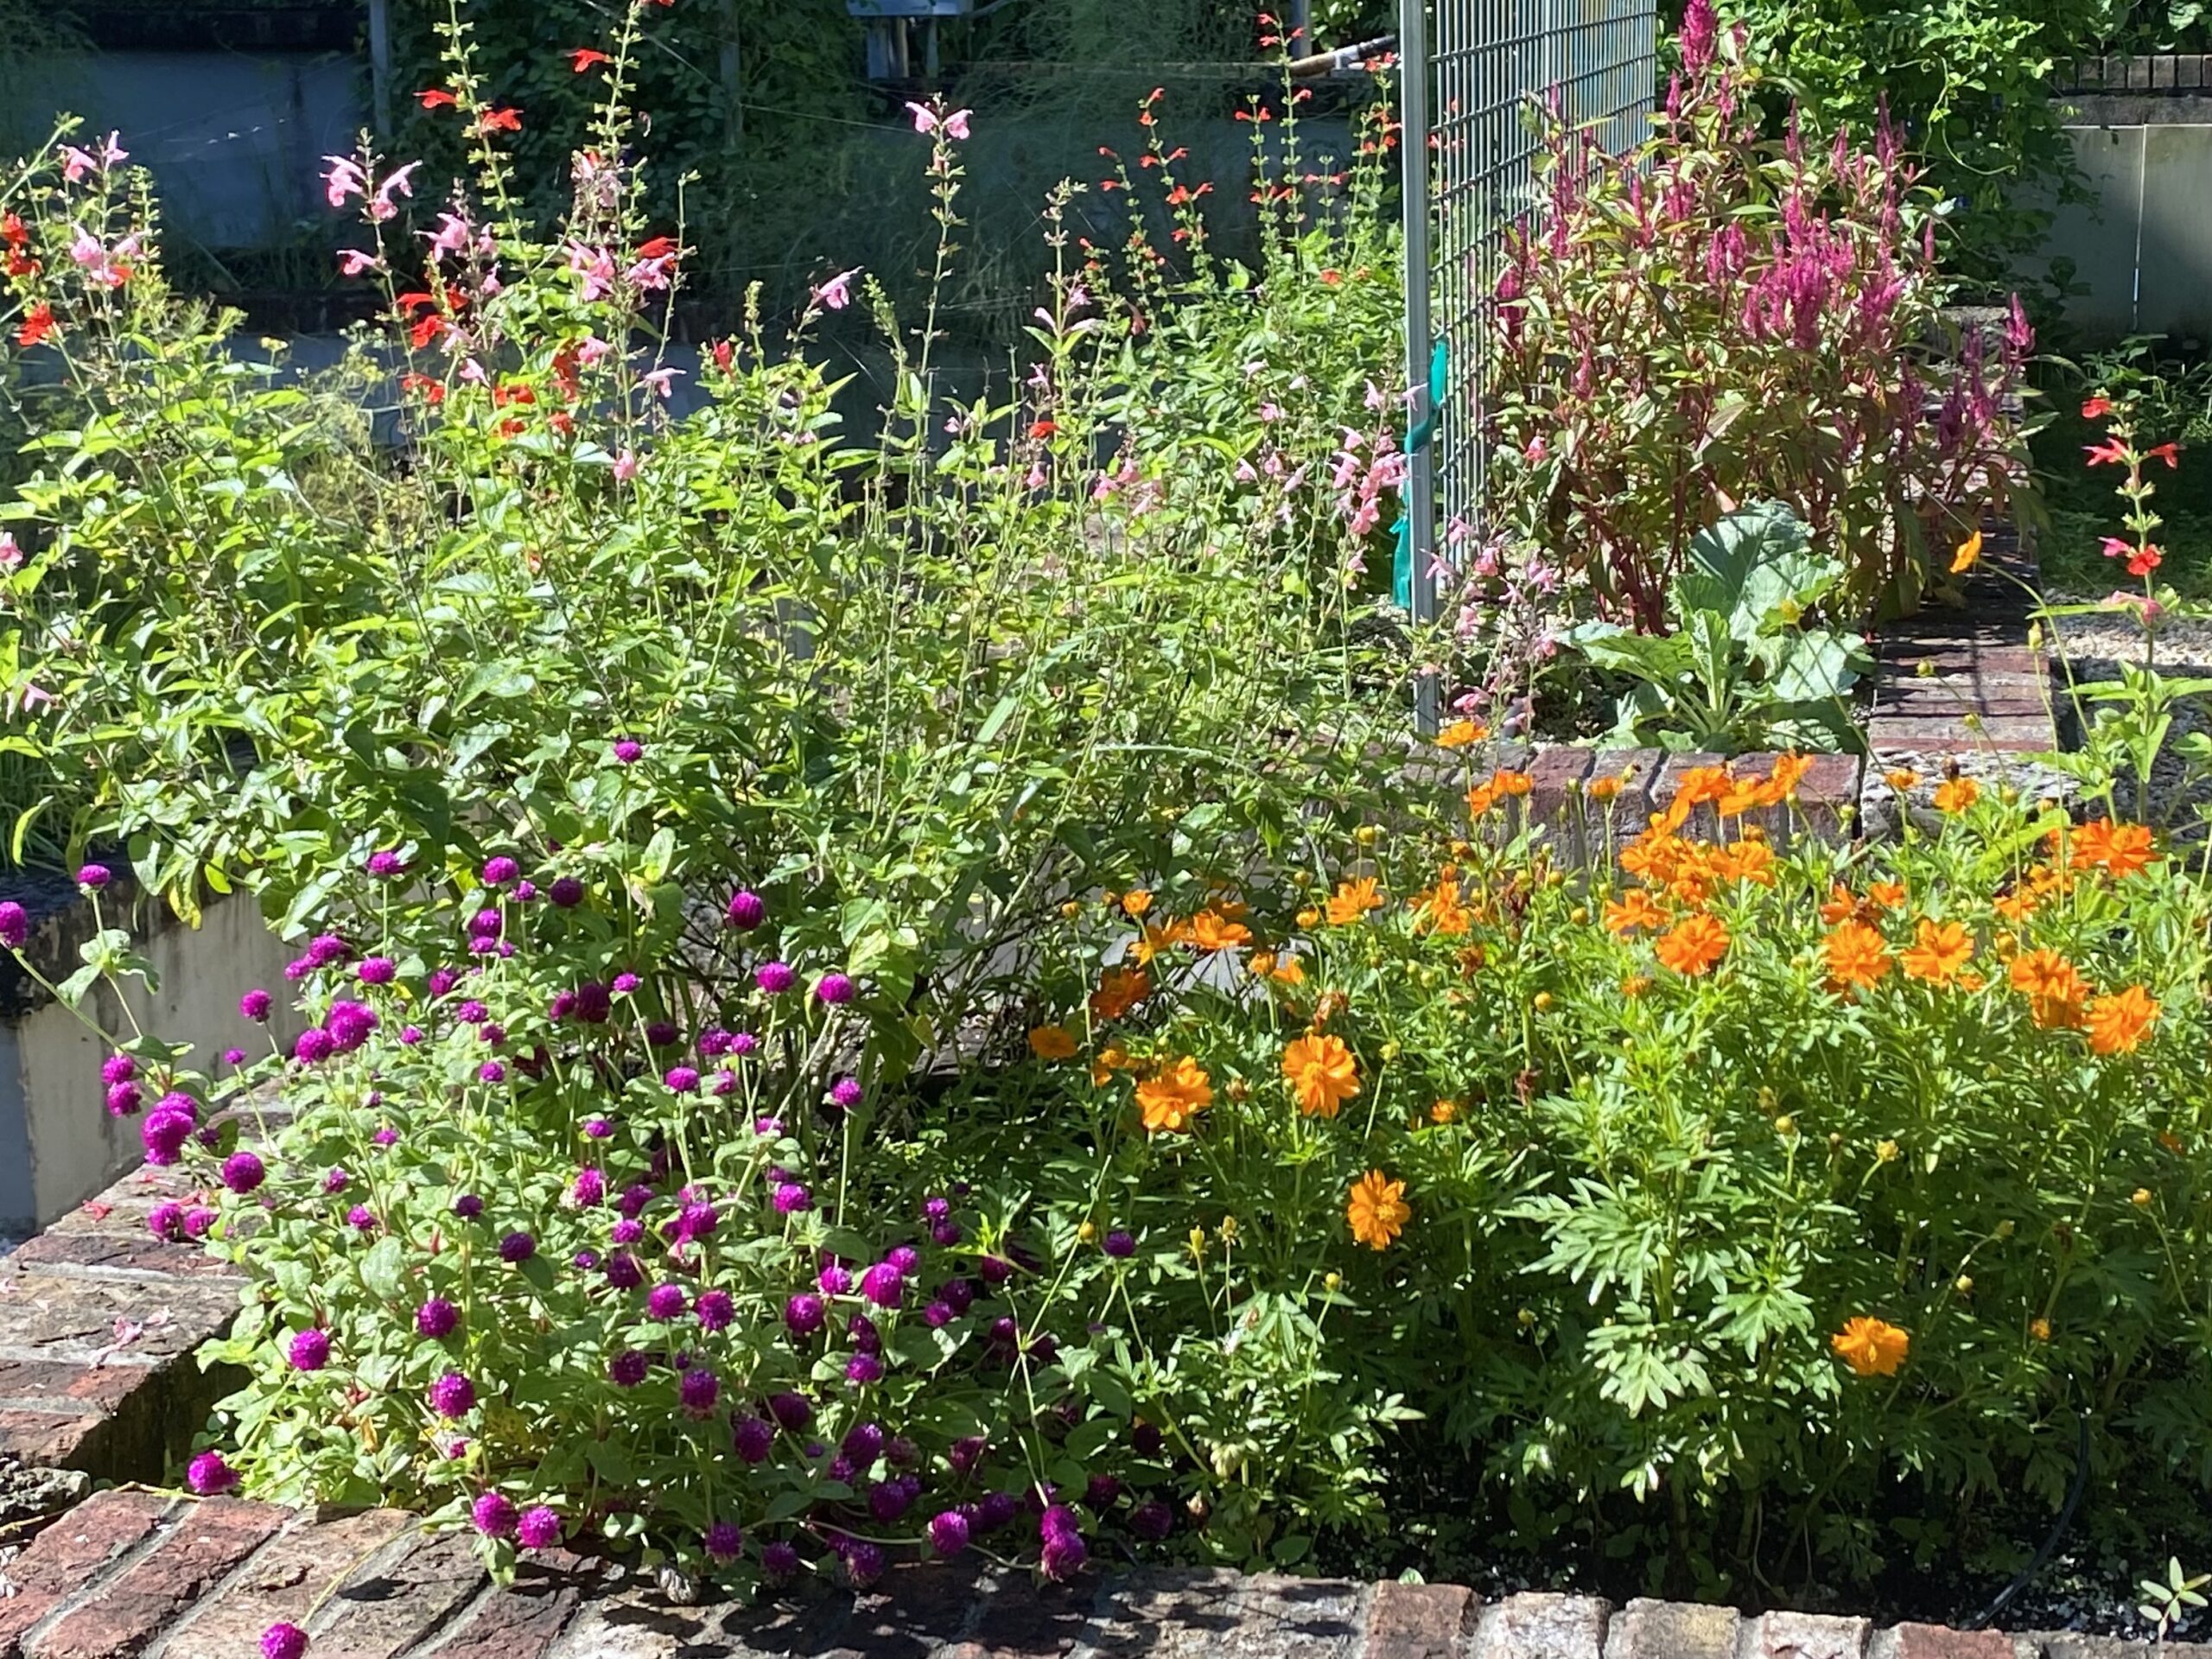 A variety of flowers in garden beds